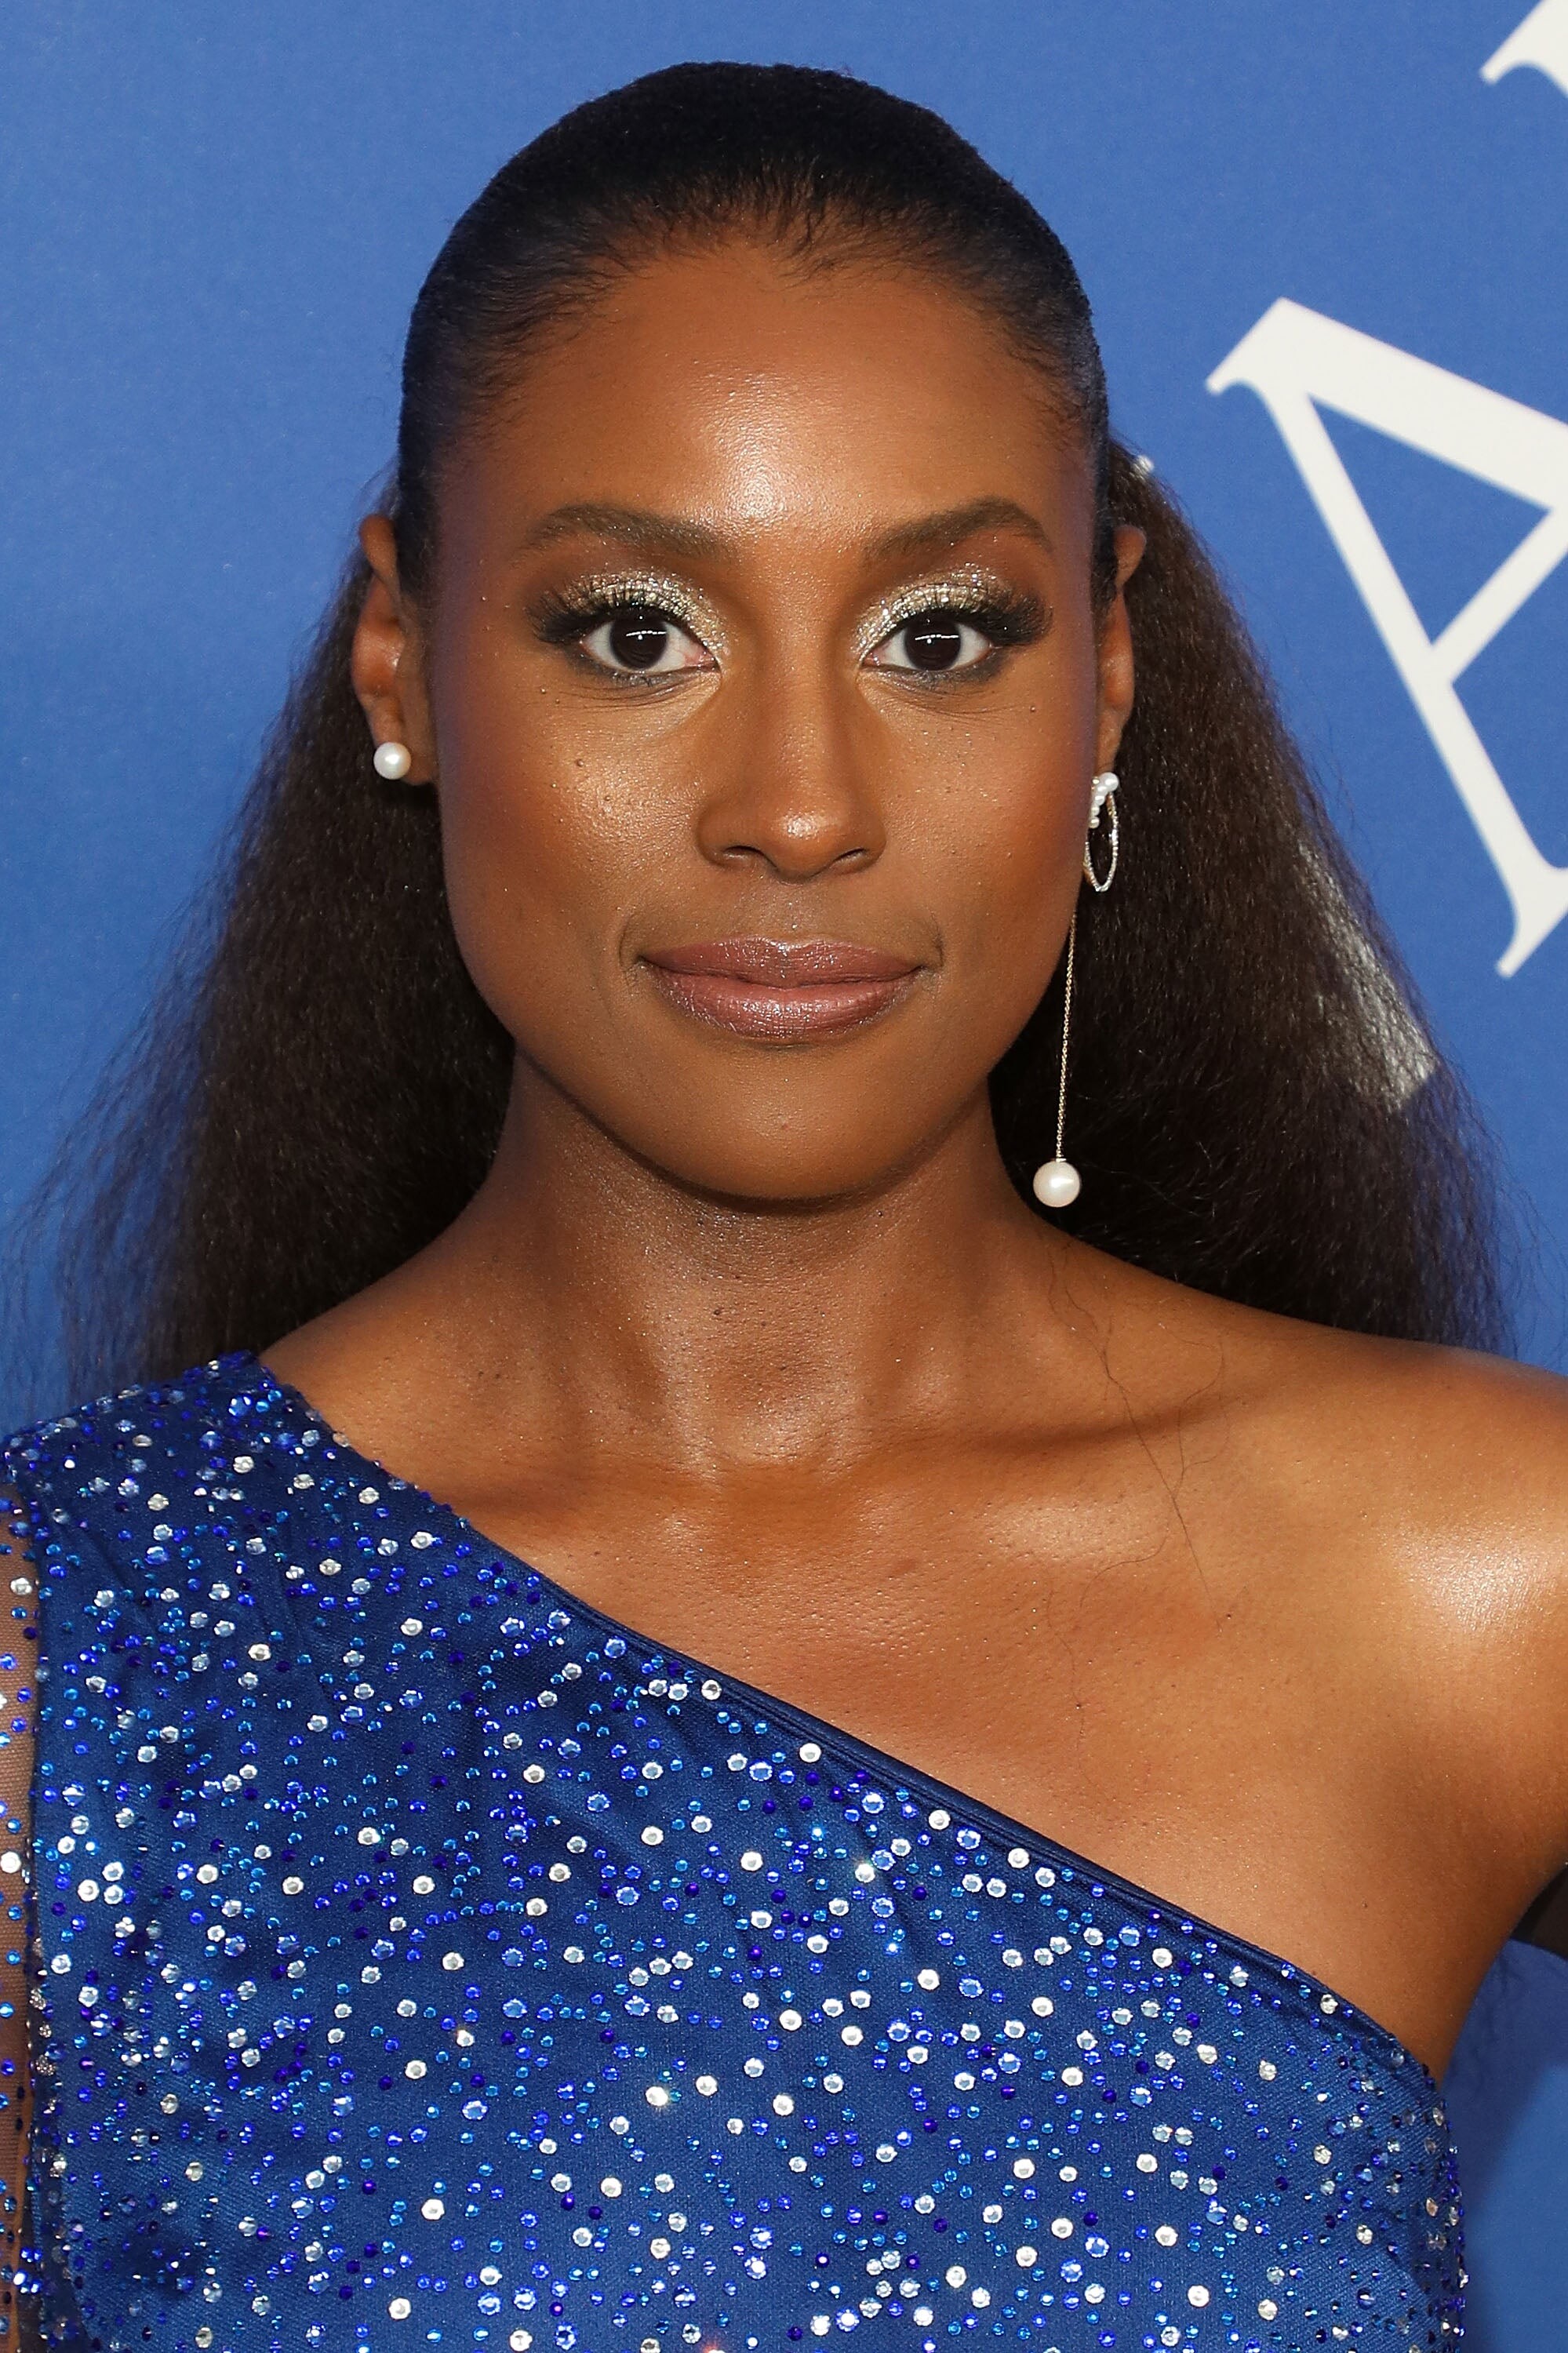 Issa Rae: An American actress who played April Ofrah in 2018 movie The Hate U Give. 2000x3000 HD Background.